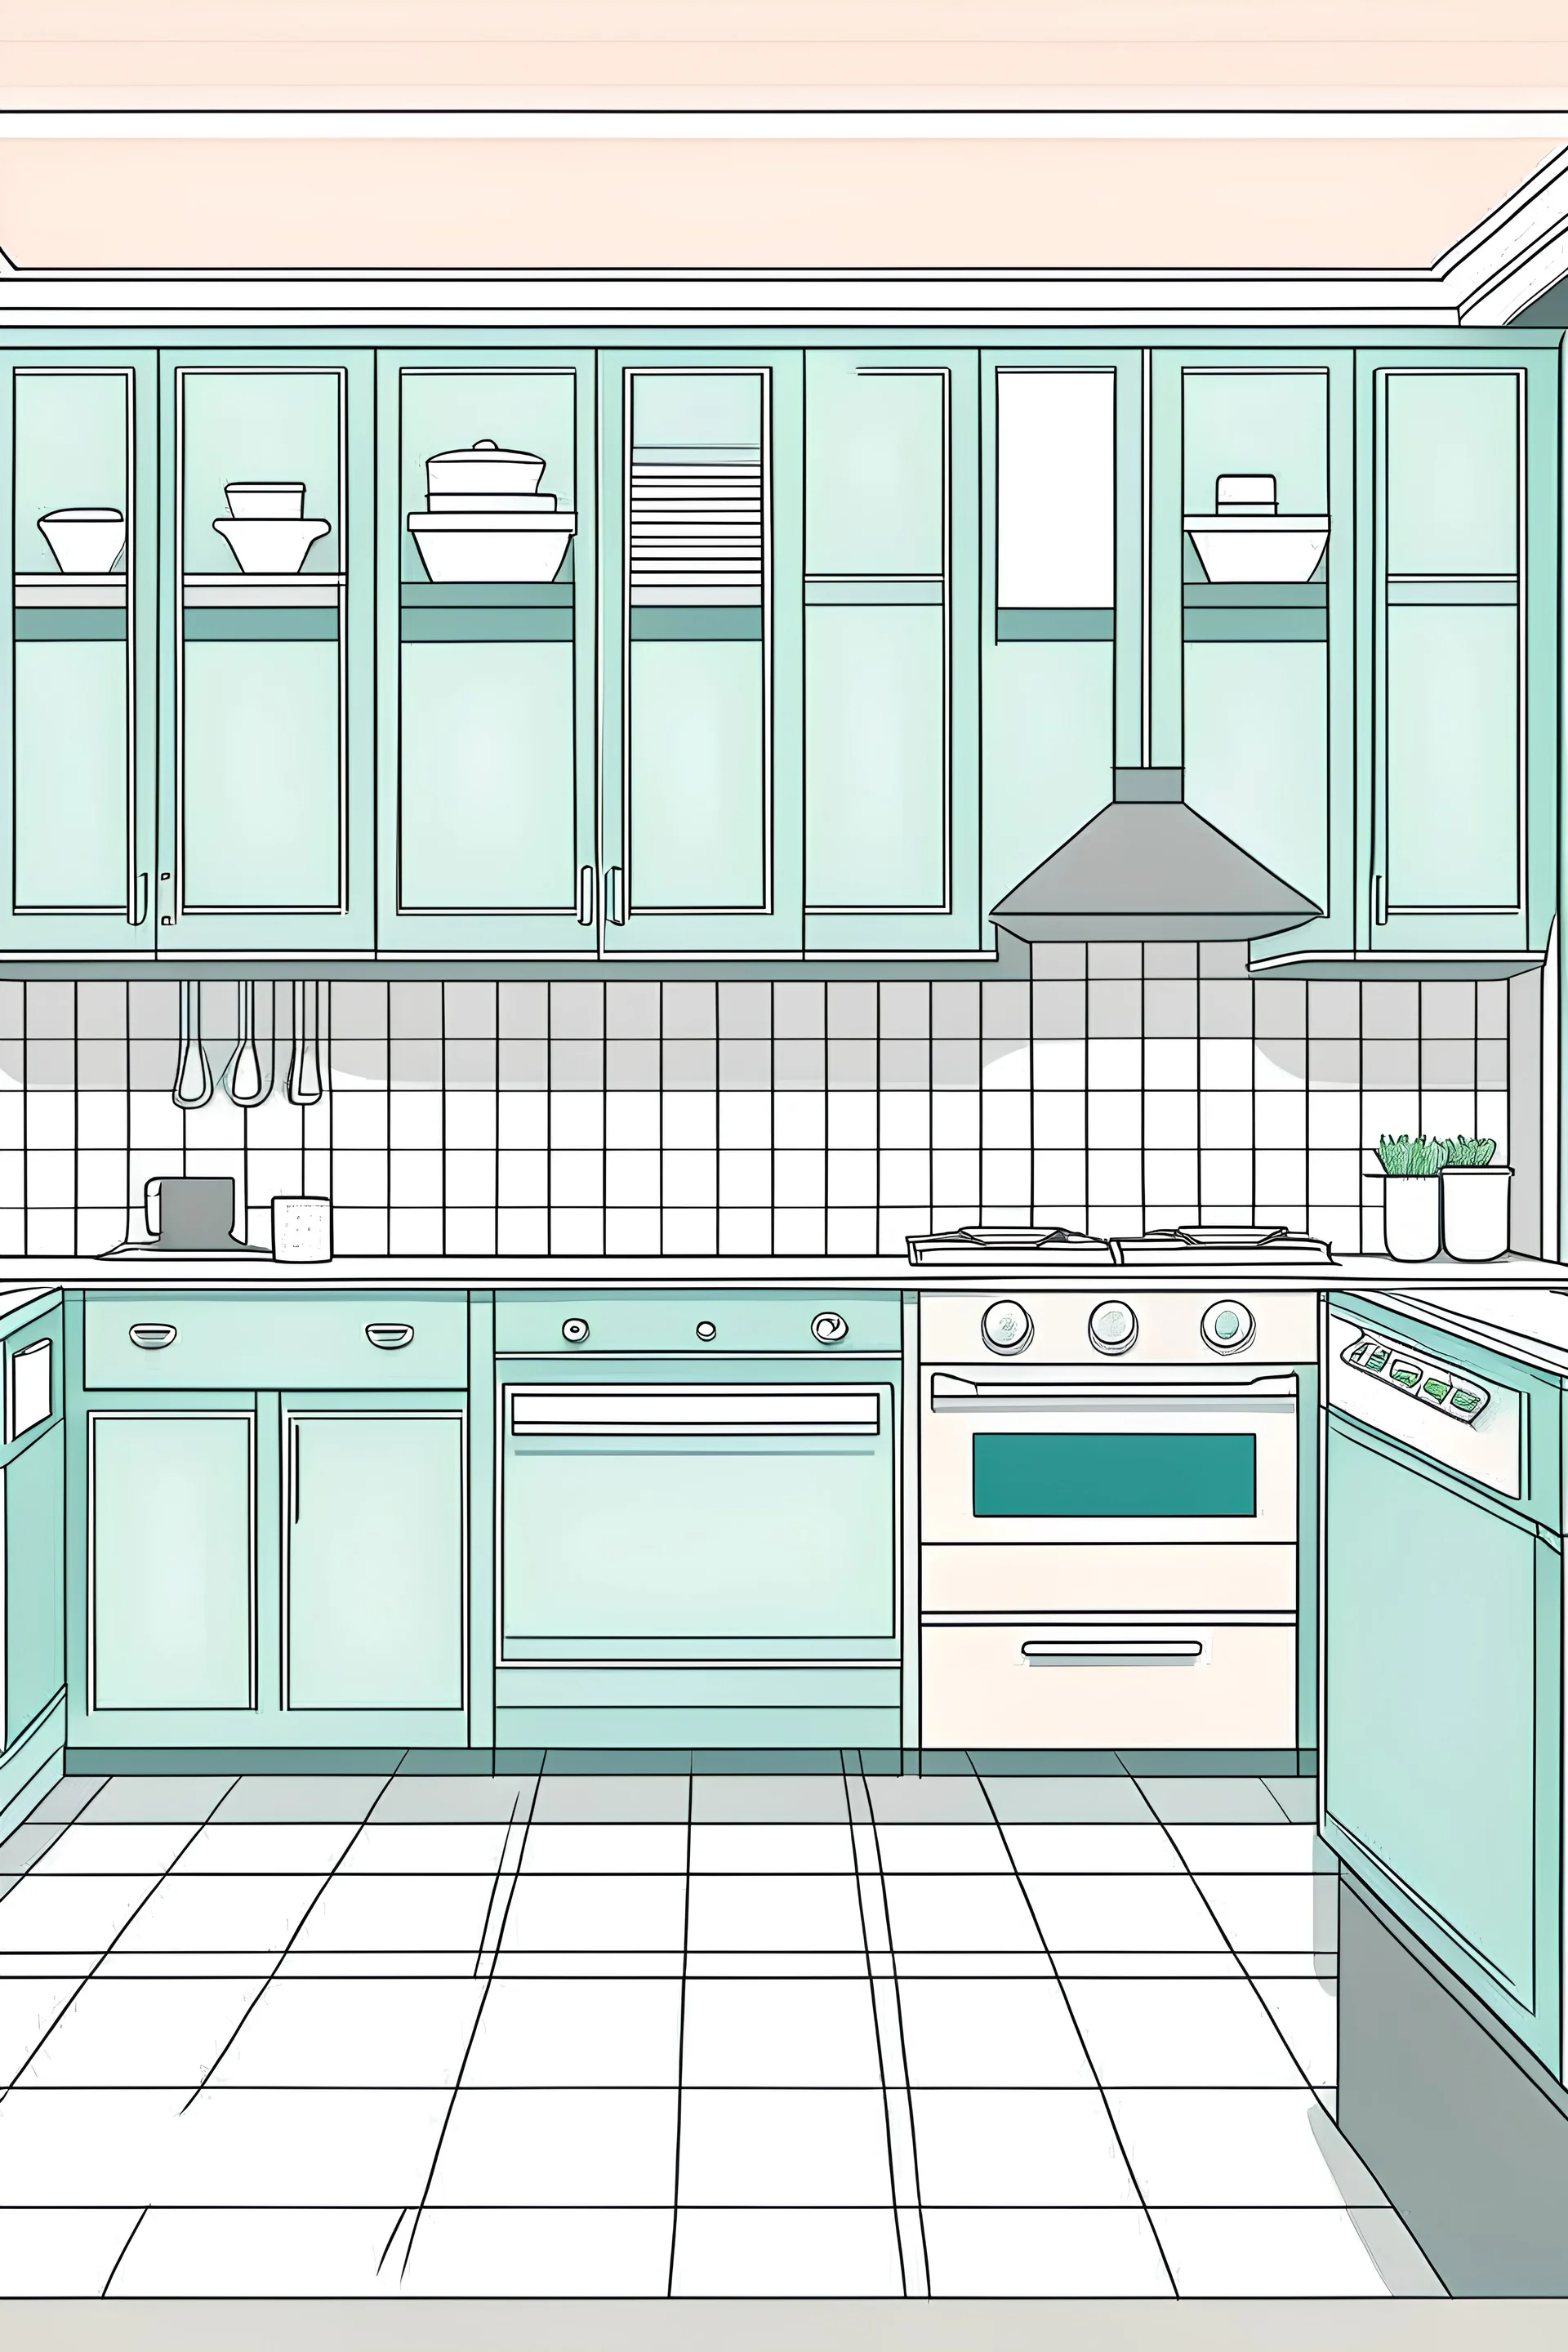 A cartoon drawing of a kitchen in the form of a straight line in calm colors